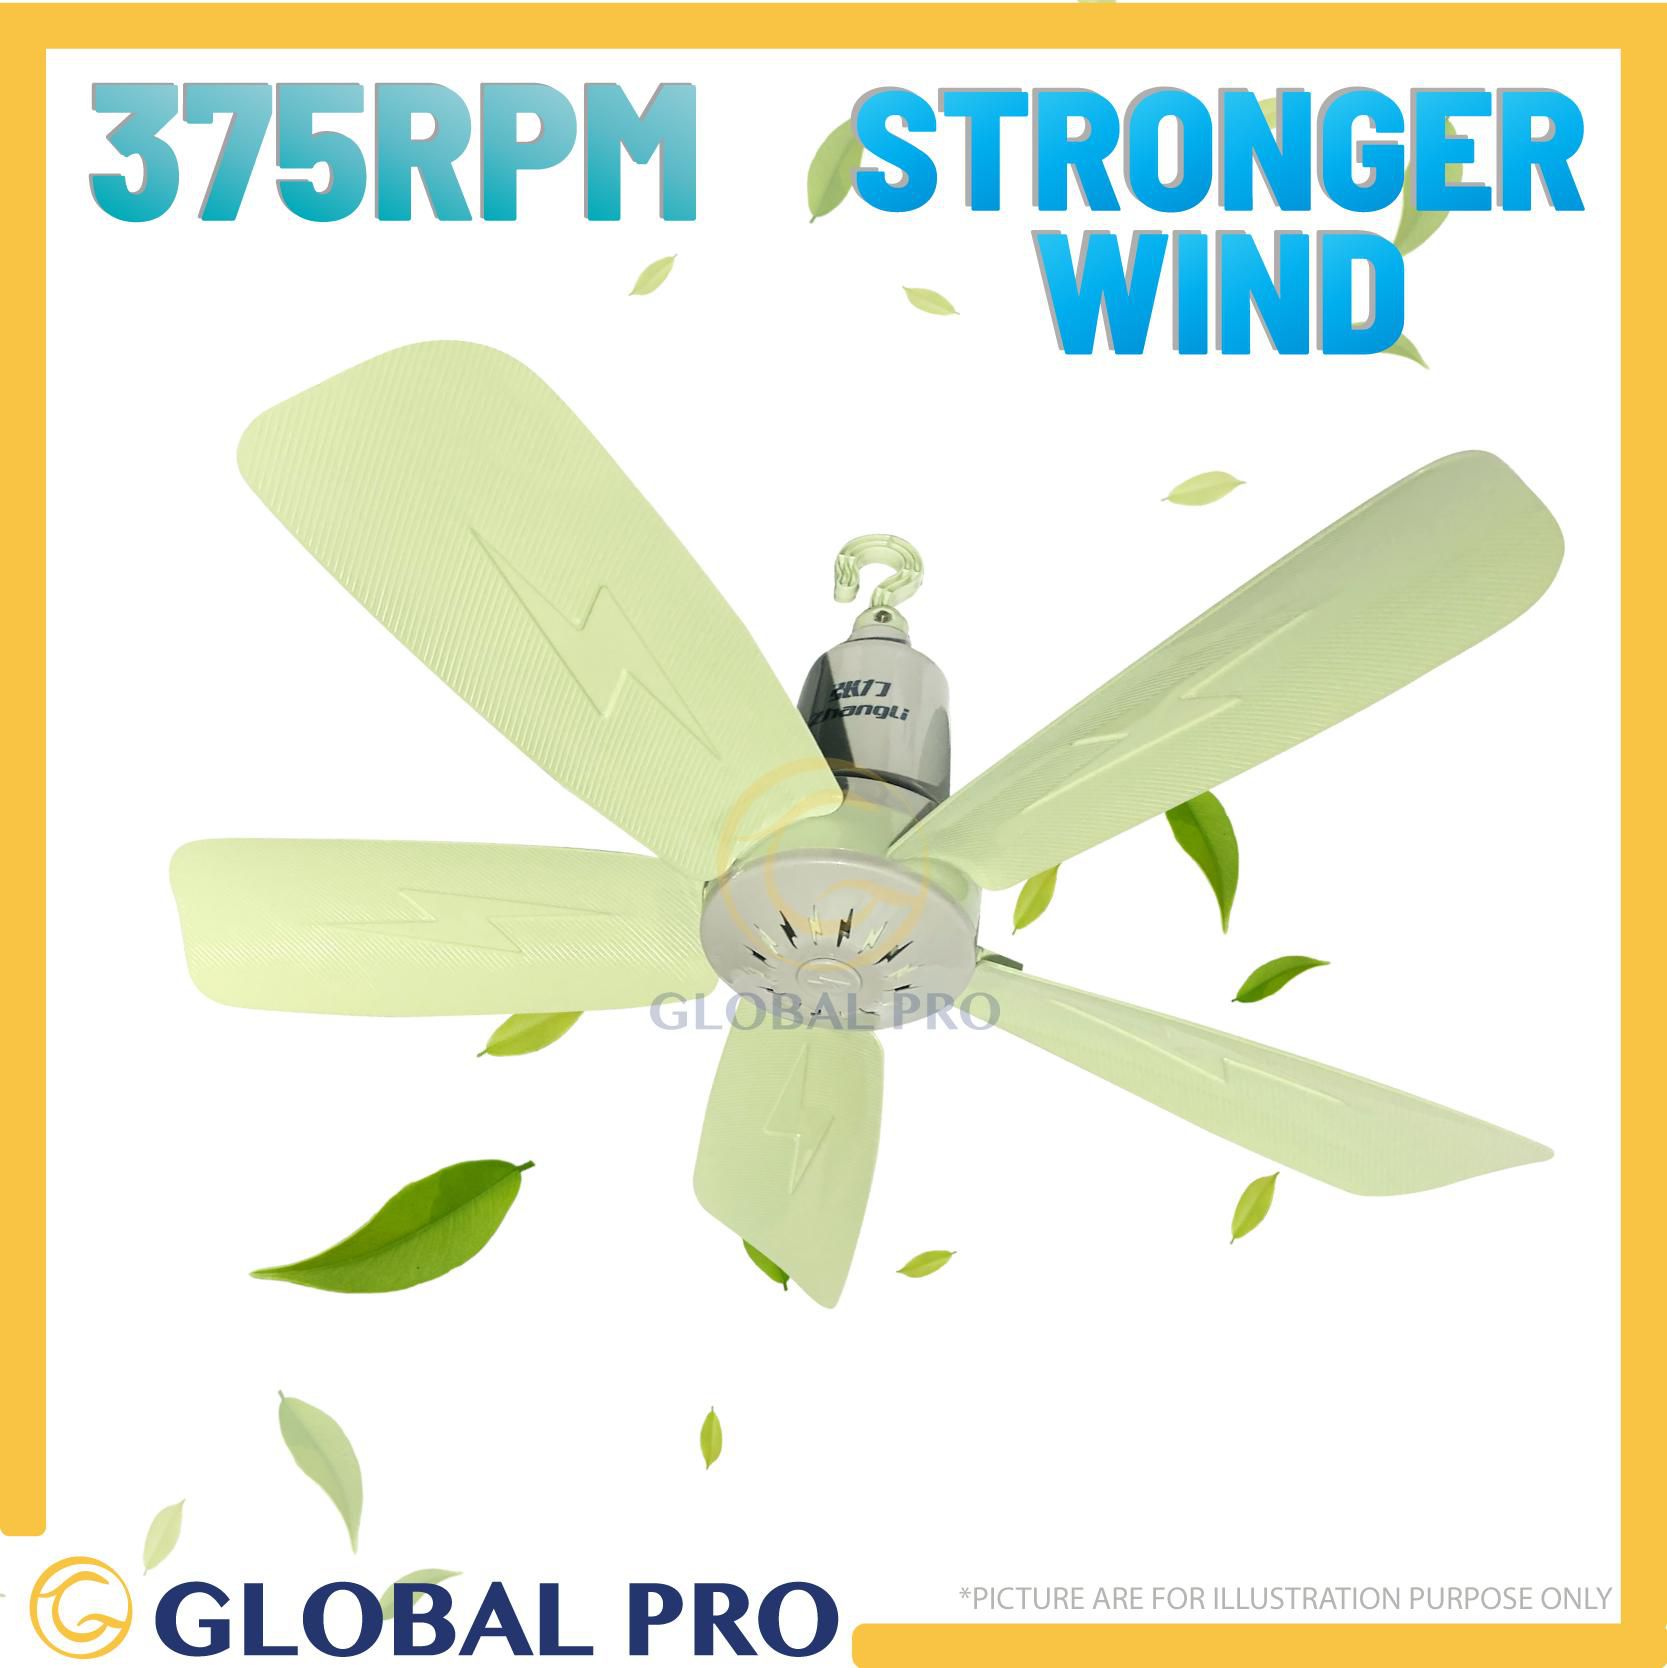 STRONG WIND 15W 5 Blades Mini Ceiling Fan Air Conditioner Cooler